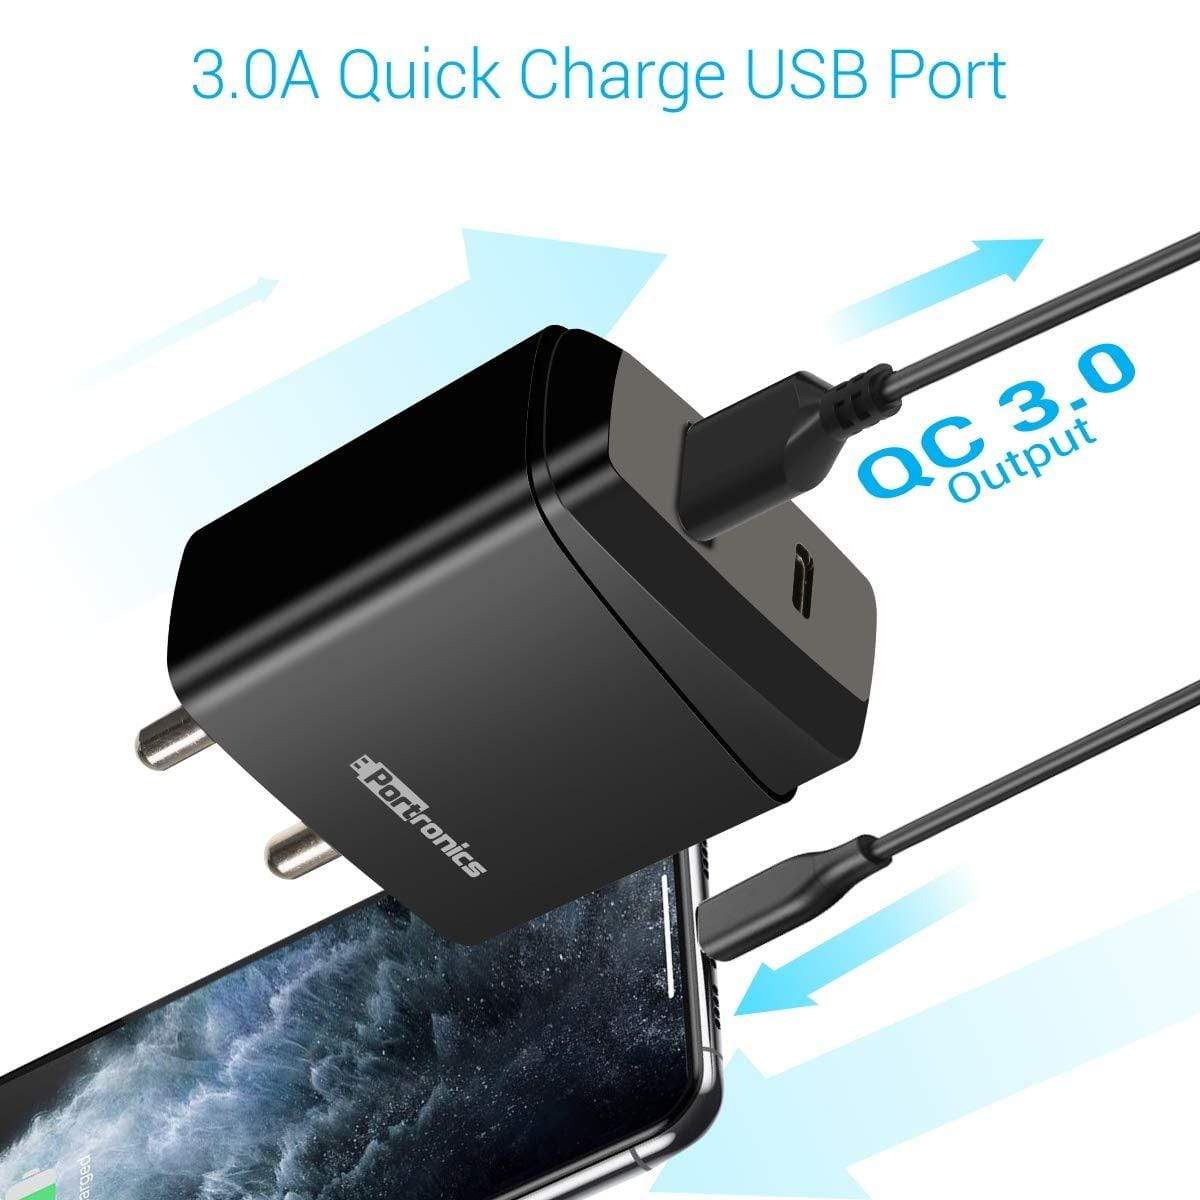 Portronics Adapto 22 Quick Charger USB Wall Adapter with Single 3.0A Quick Charging USB Port-adapter-dealsplant